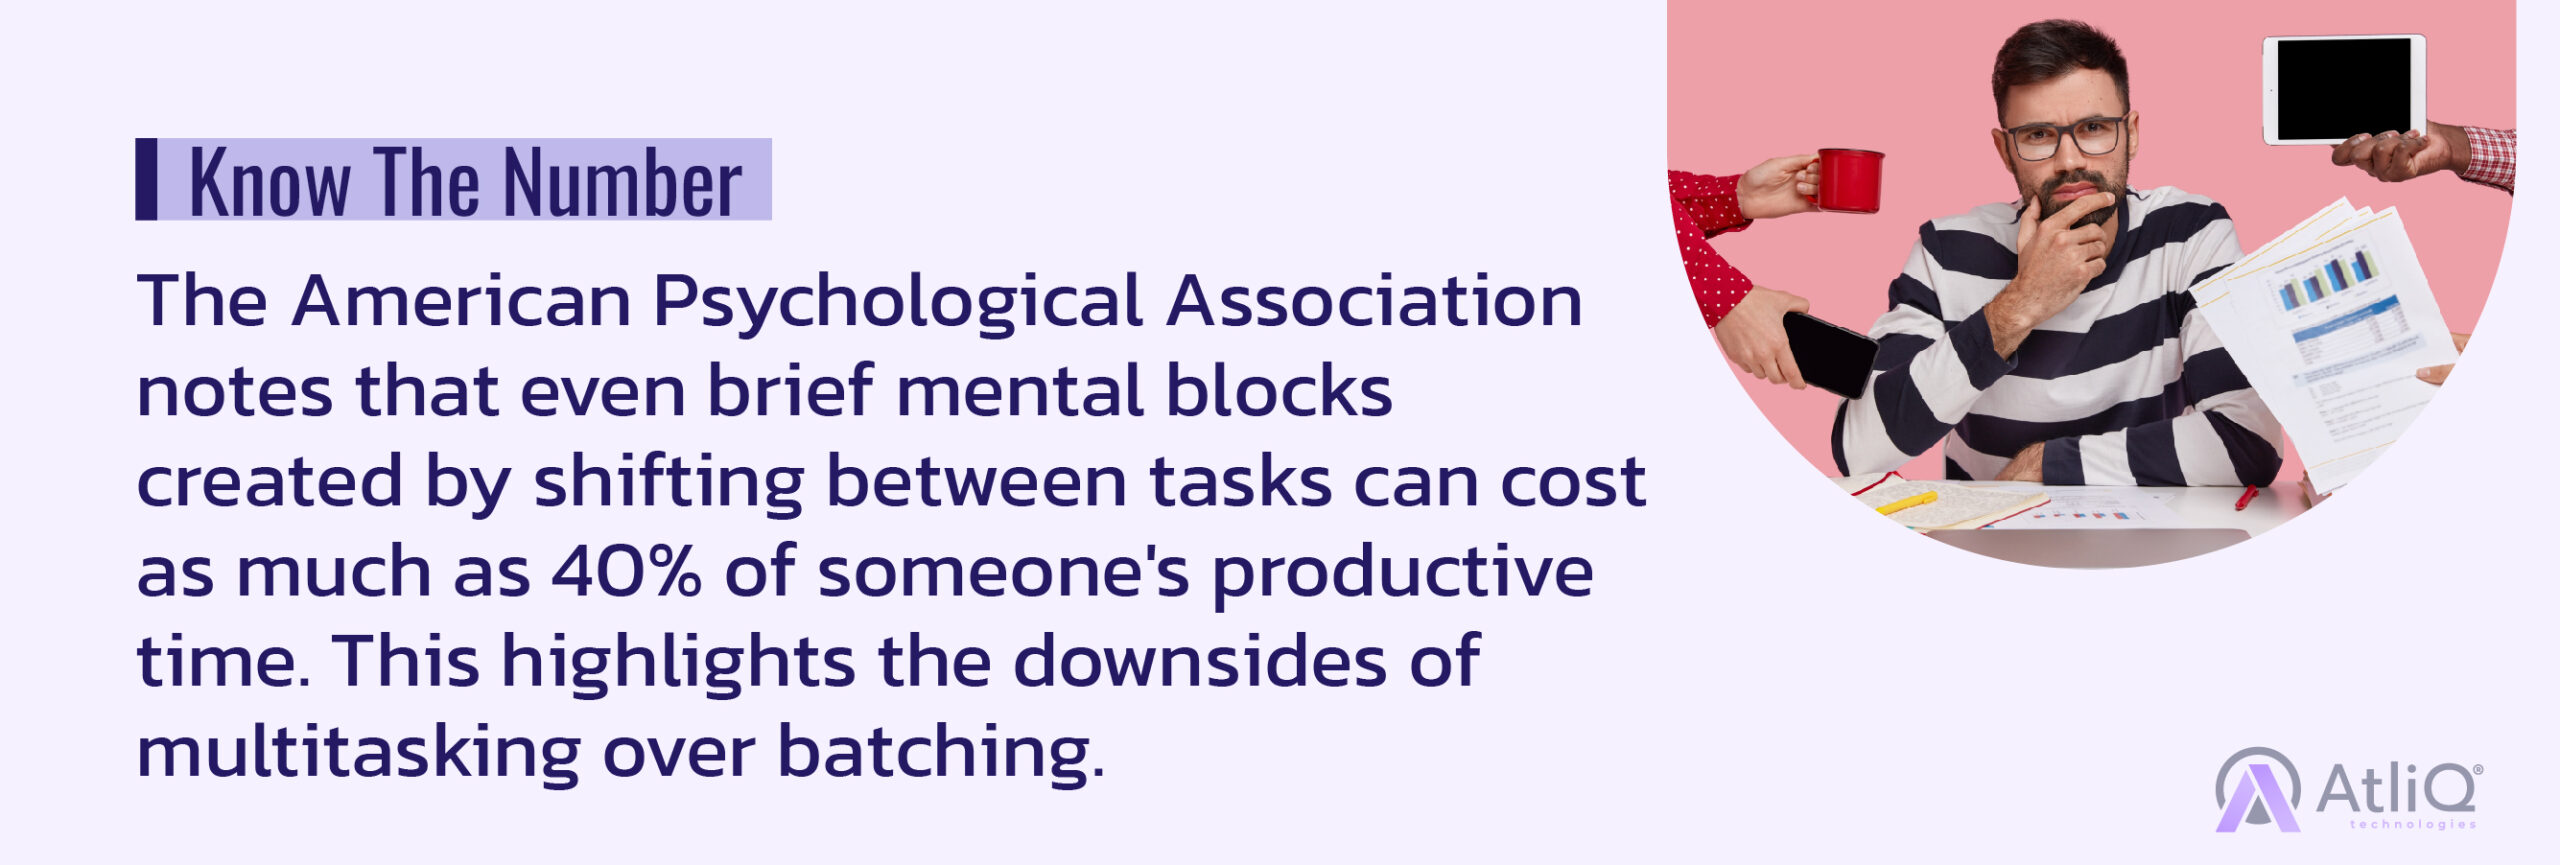  The American Psychological Association notes that even brief mental blocks created by shifting between tasks can cost as much as 40% of someone's productive time